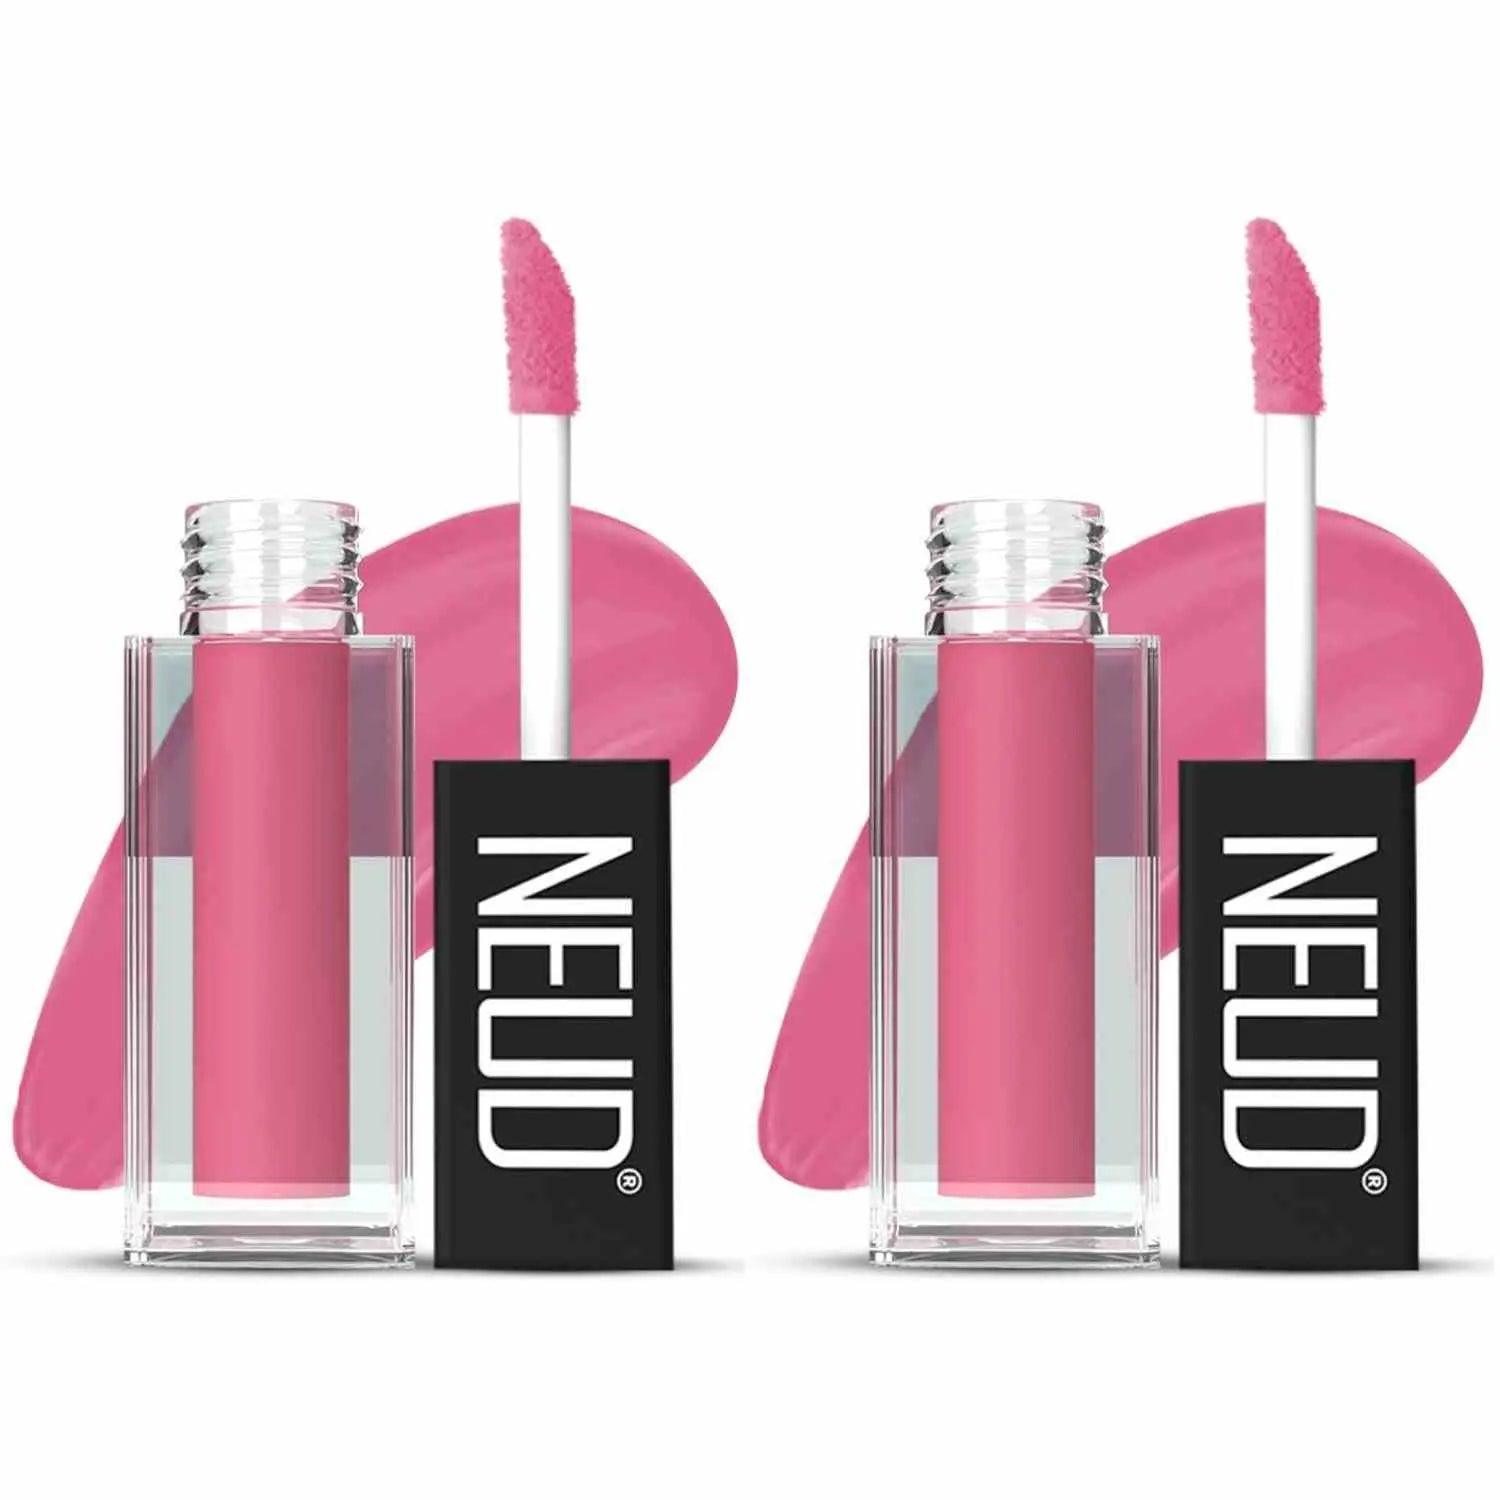 NEUD Matte Liquid Lipstick Supple Candy with Jojoba Oil, Vitamin E and Almond Oil - Smudge Proof 12-hour Stay Formula with Free Lip Gloss 7419870728922